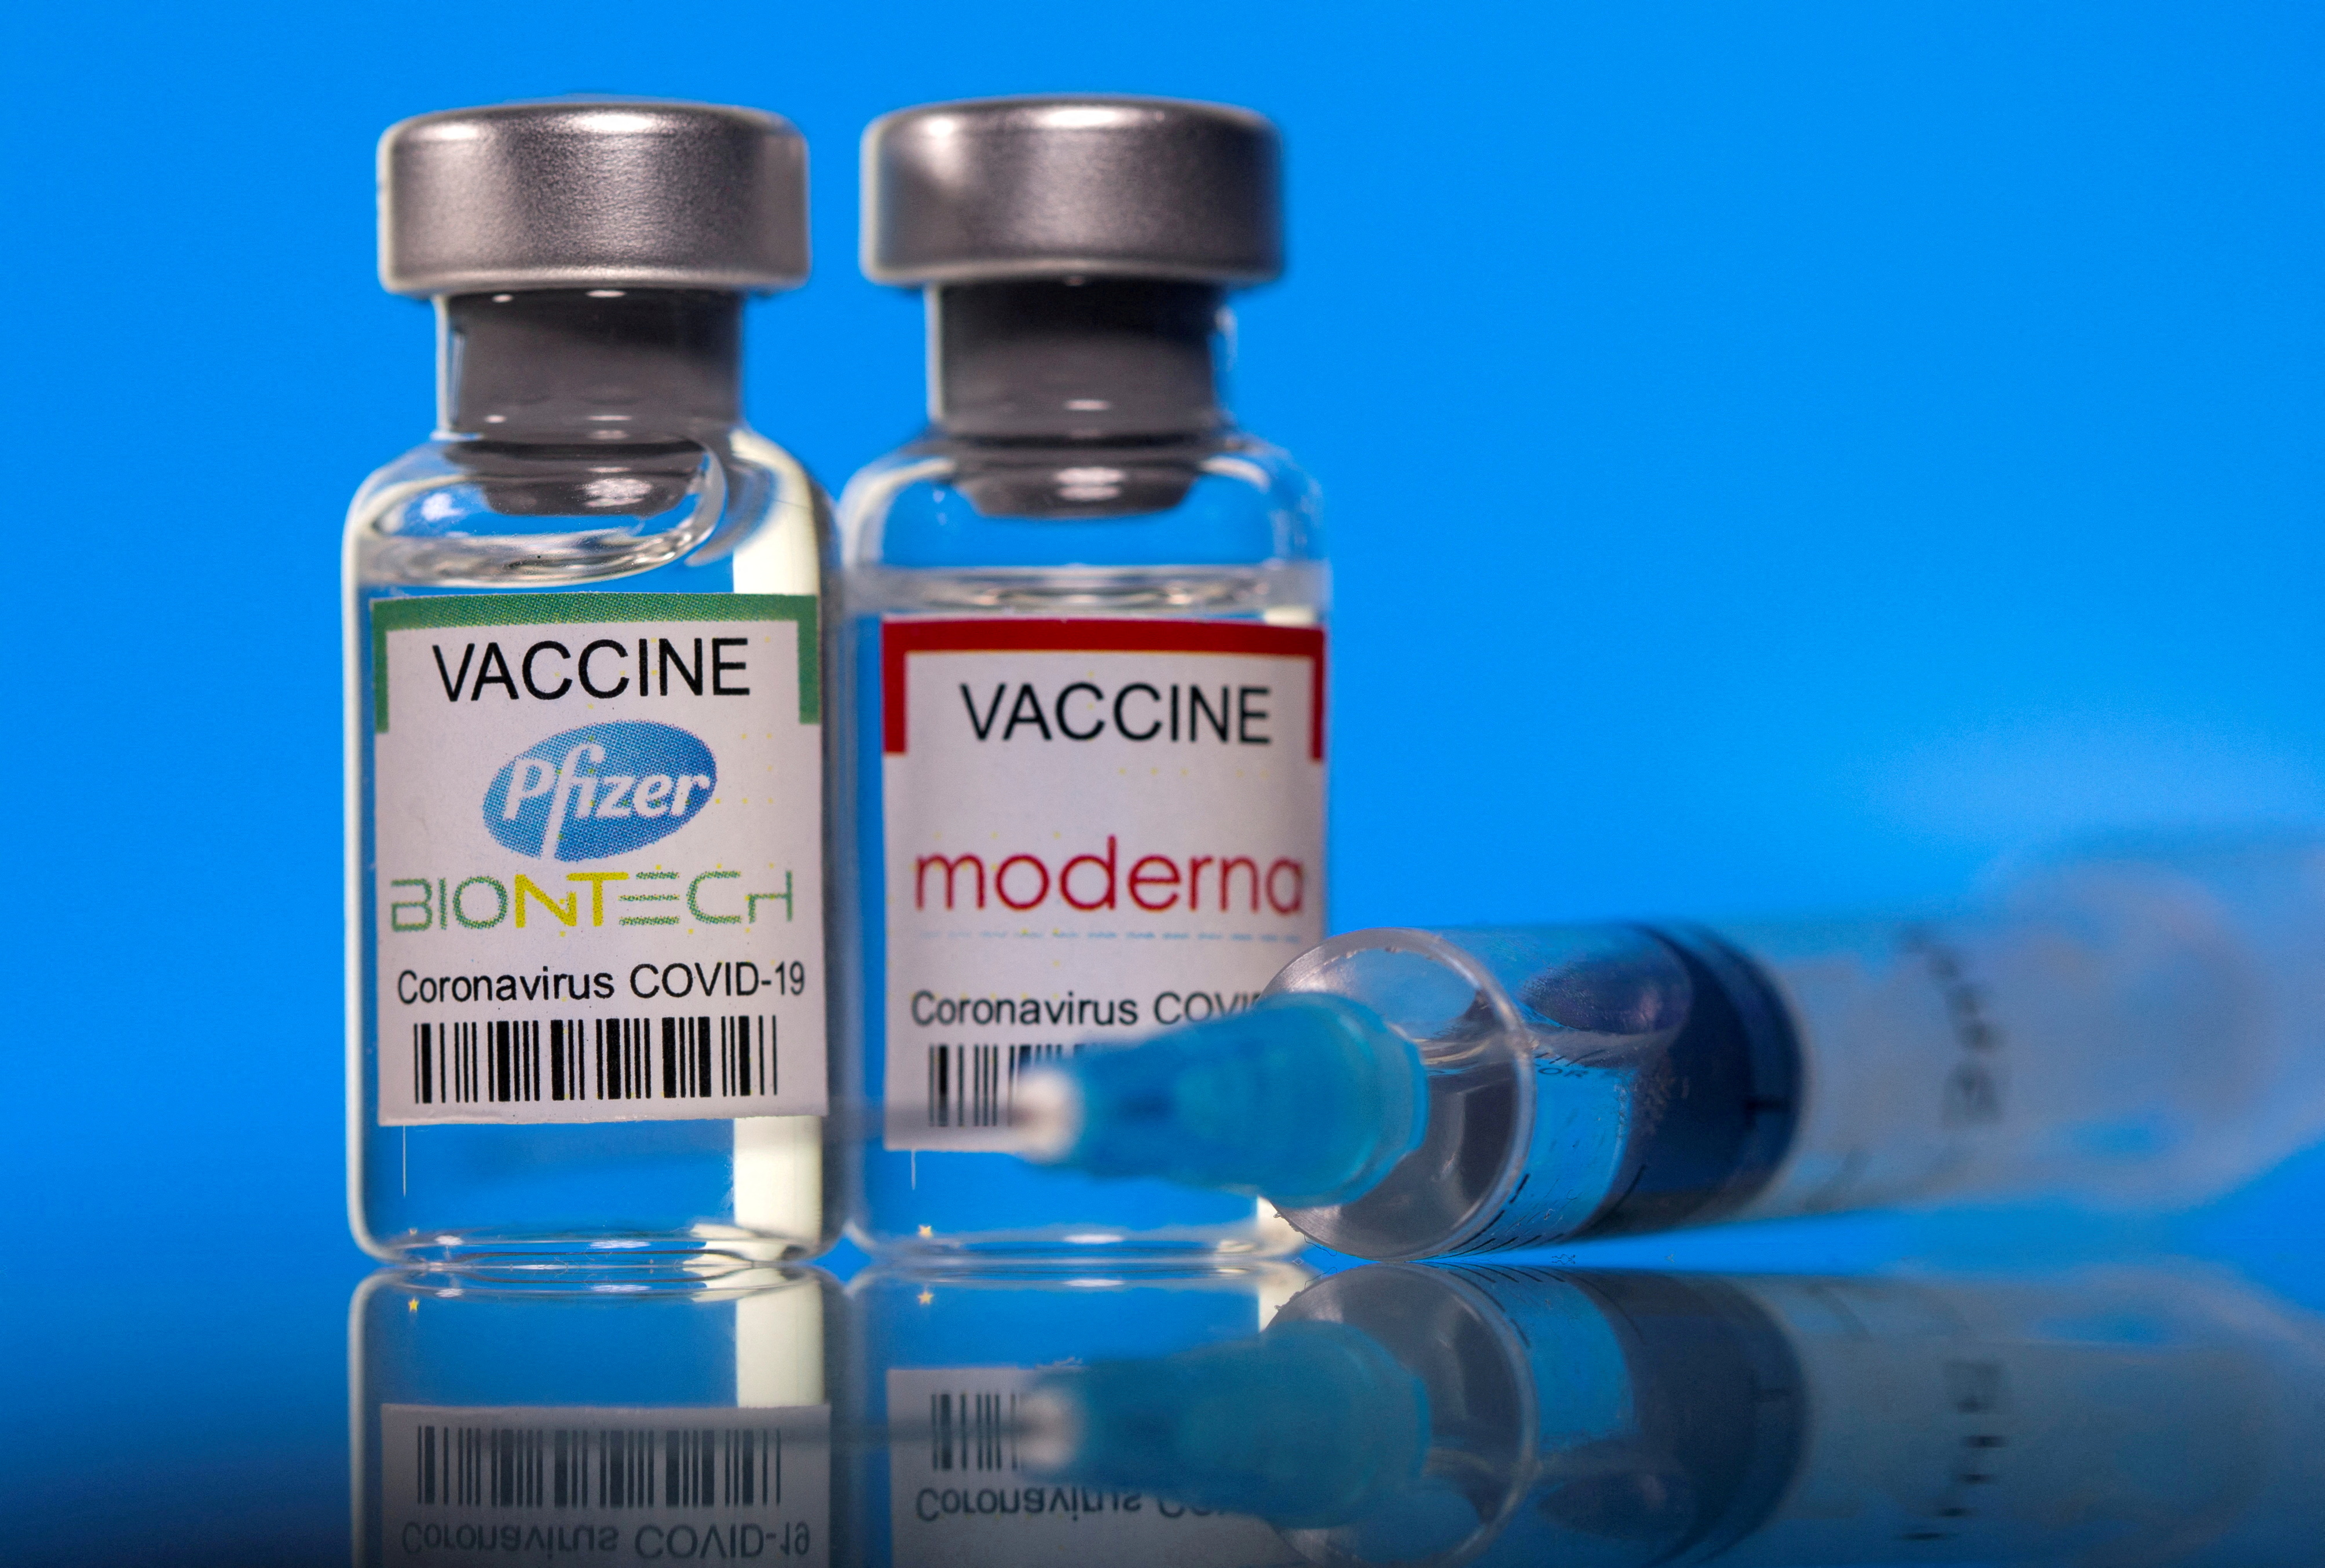 Vials with Pfizer-BioNTech and Moderna coronavirus disease (COVID-19) vaccine labels are seen in this illustration picture taken March 19, 2021. REUTERS/Dado Ruvic/Illustration